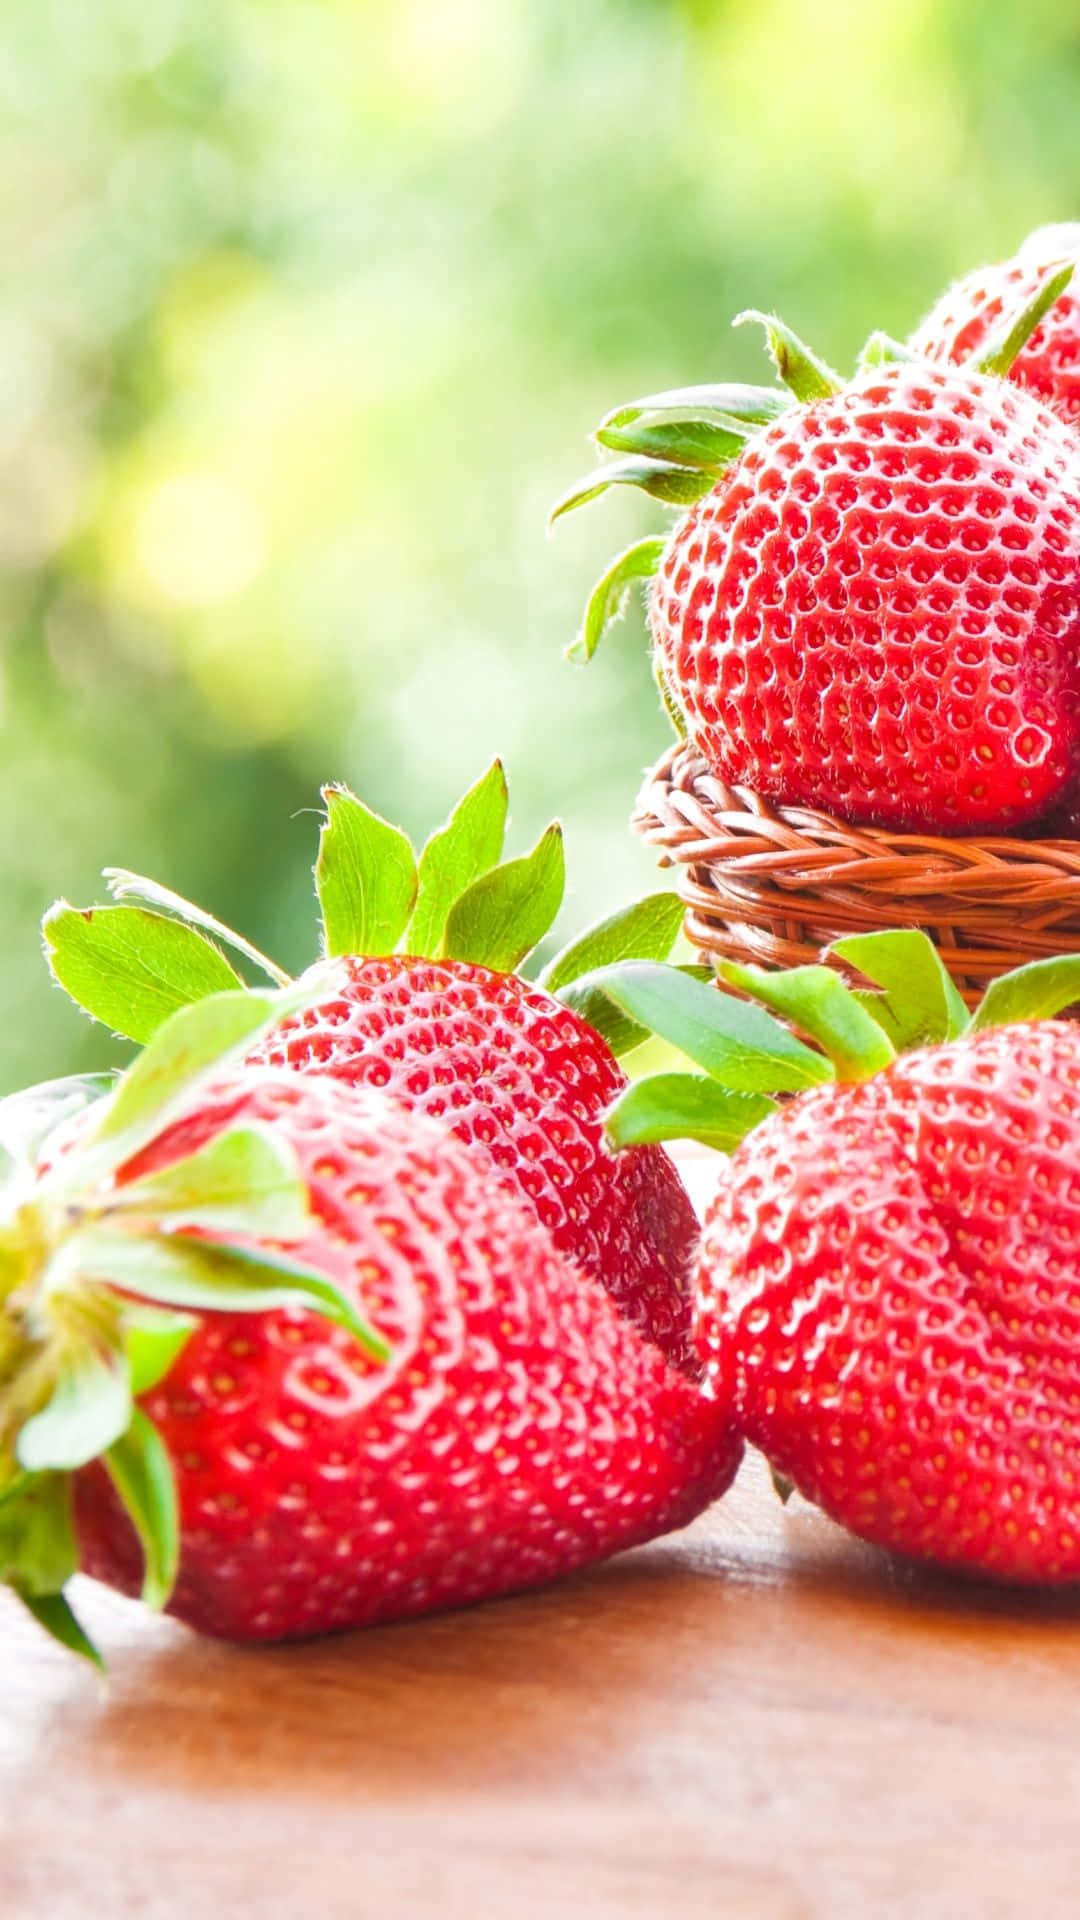 "Sweet&Juicy: A Close-up of a Cute Strawberry" Wallpaper